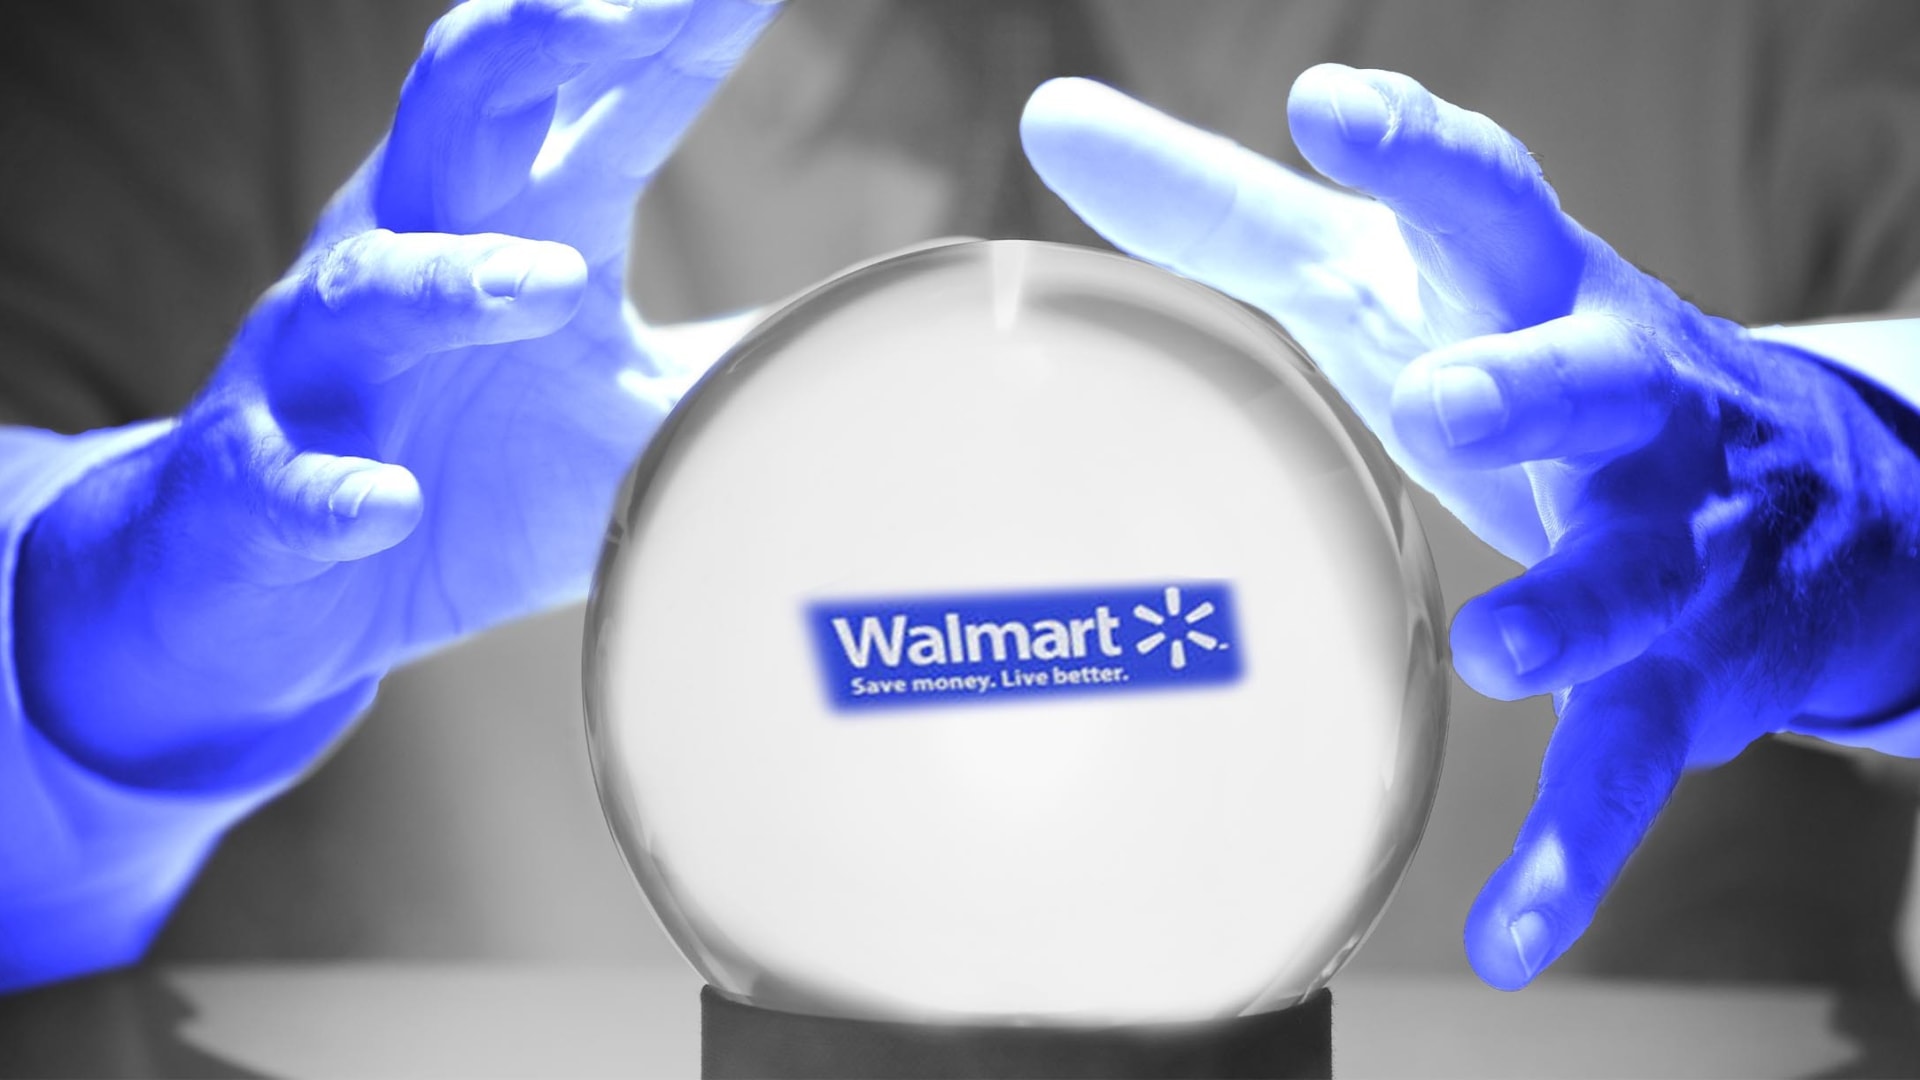 Walmart Just Started a Bold Experiment. Here's How the Future Could Look